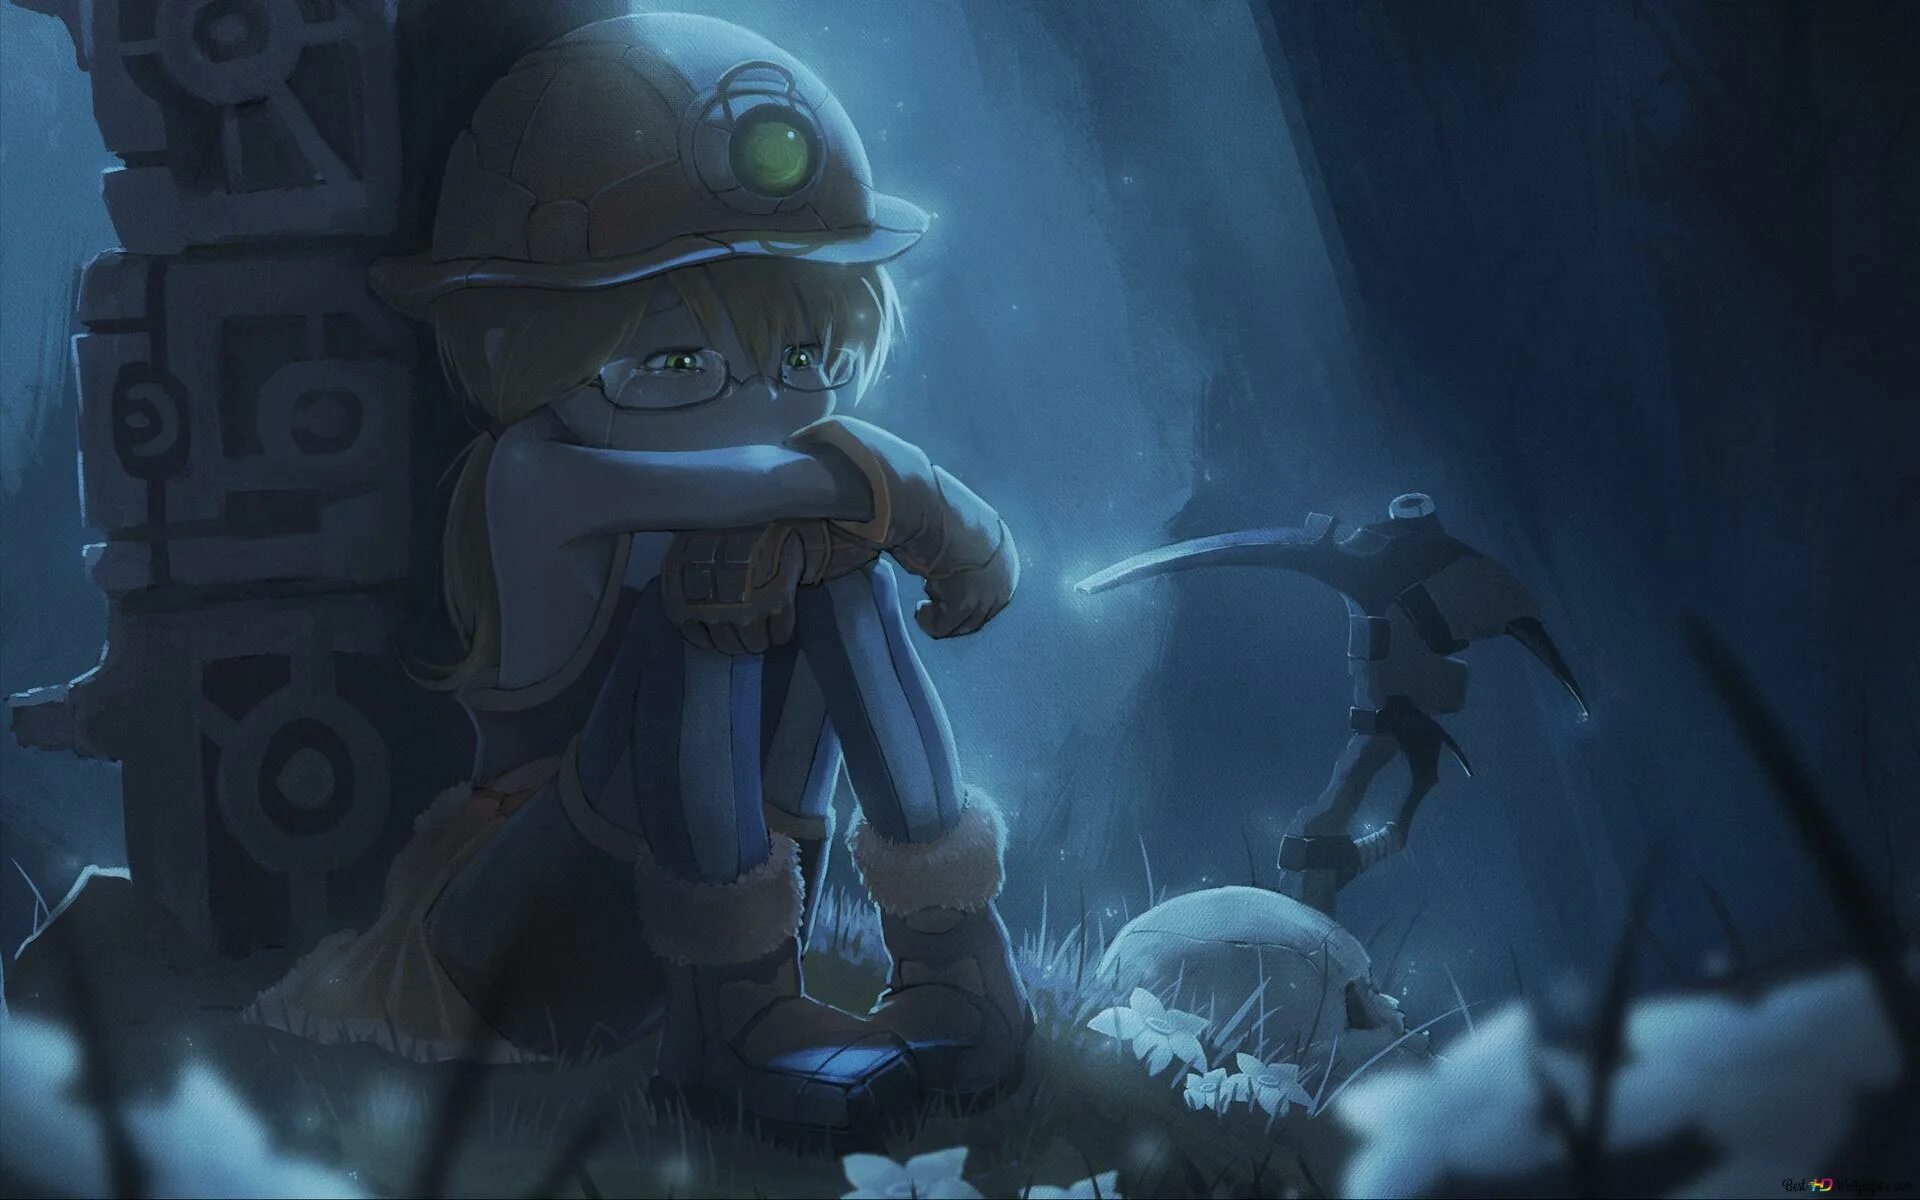 Made in Abyss. Made in Abyss бездна. Рико made in Abyss. Made in Abyss арт. Рико бездна